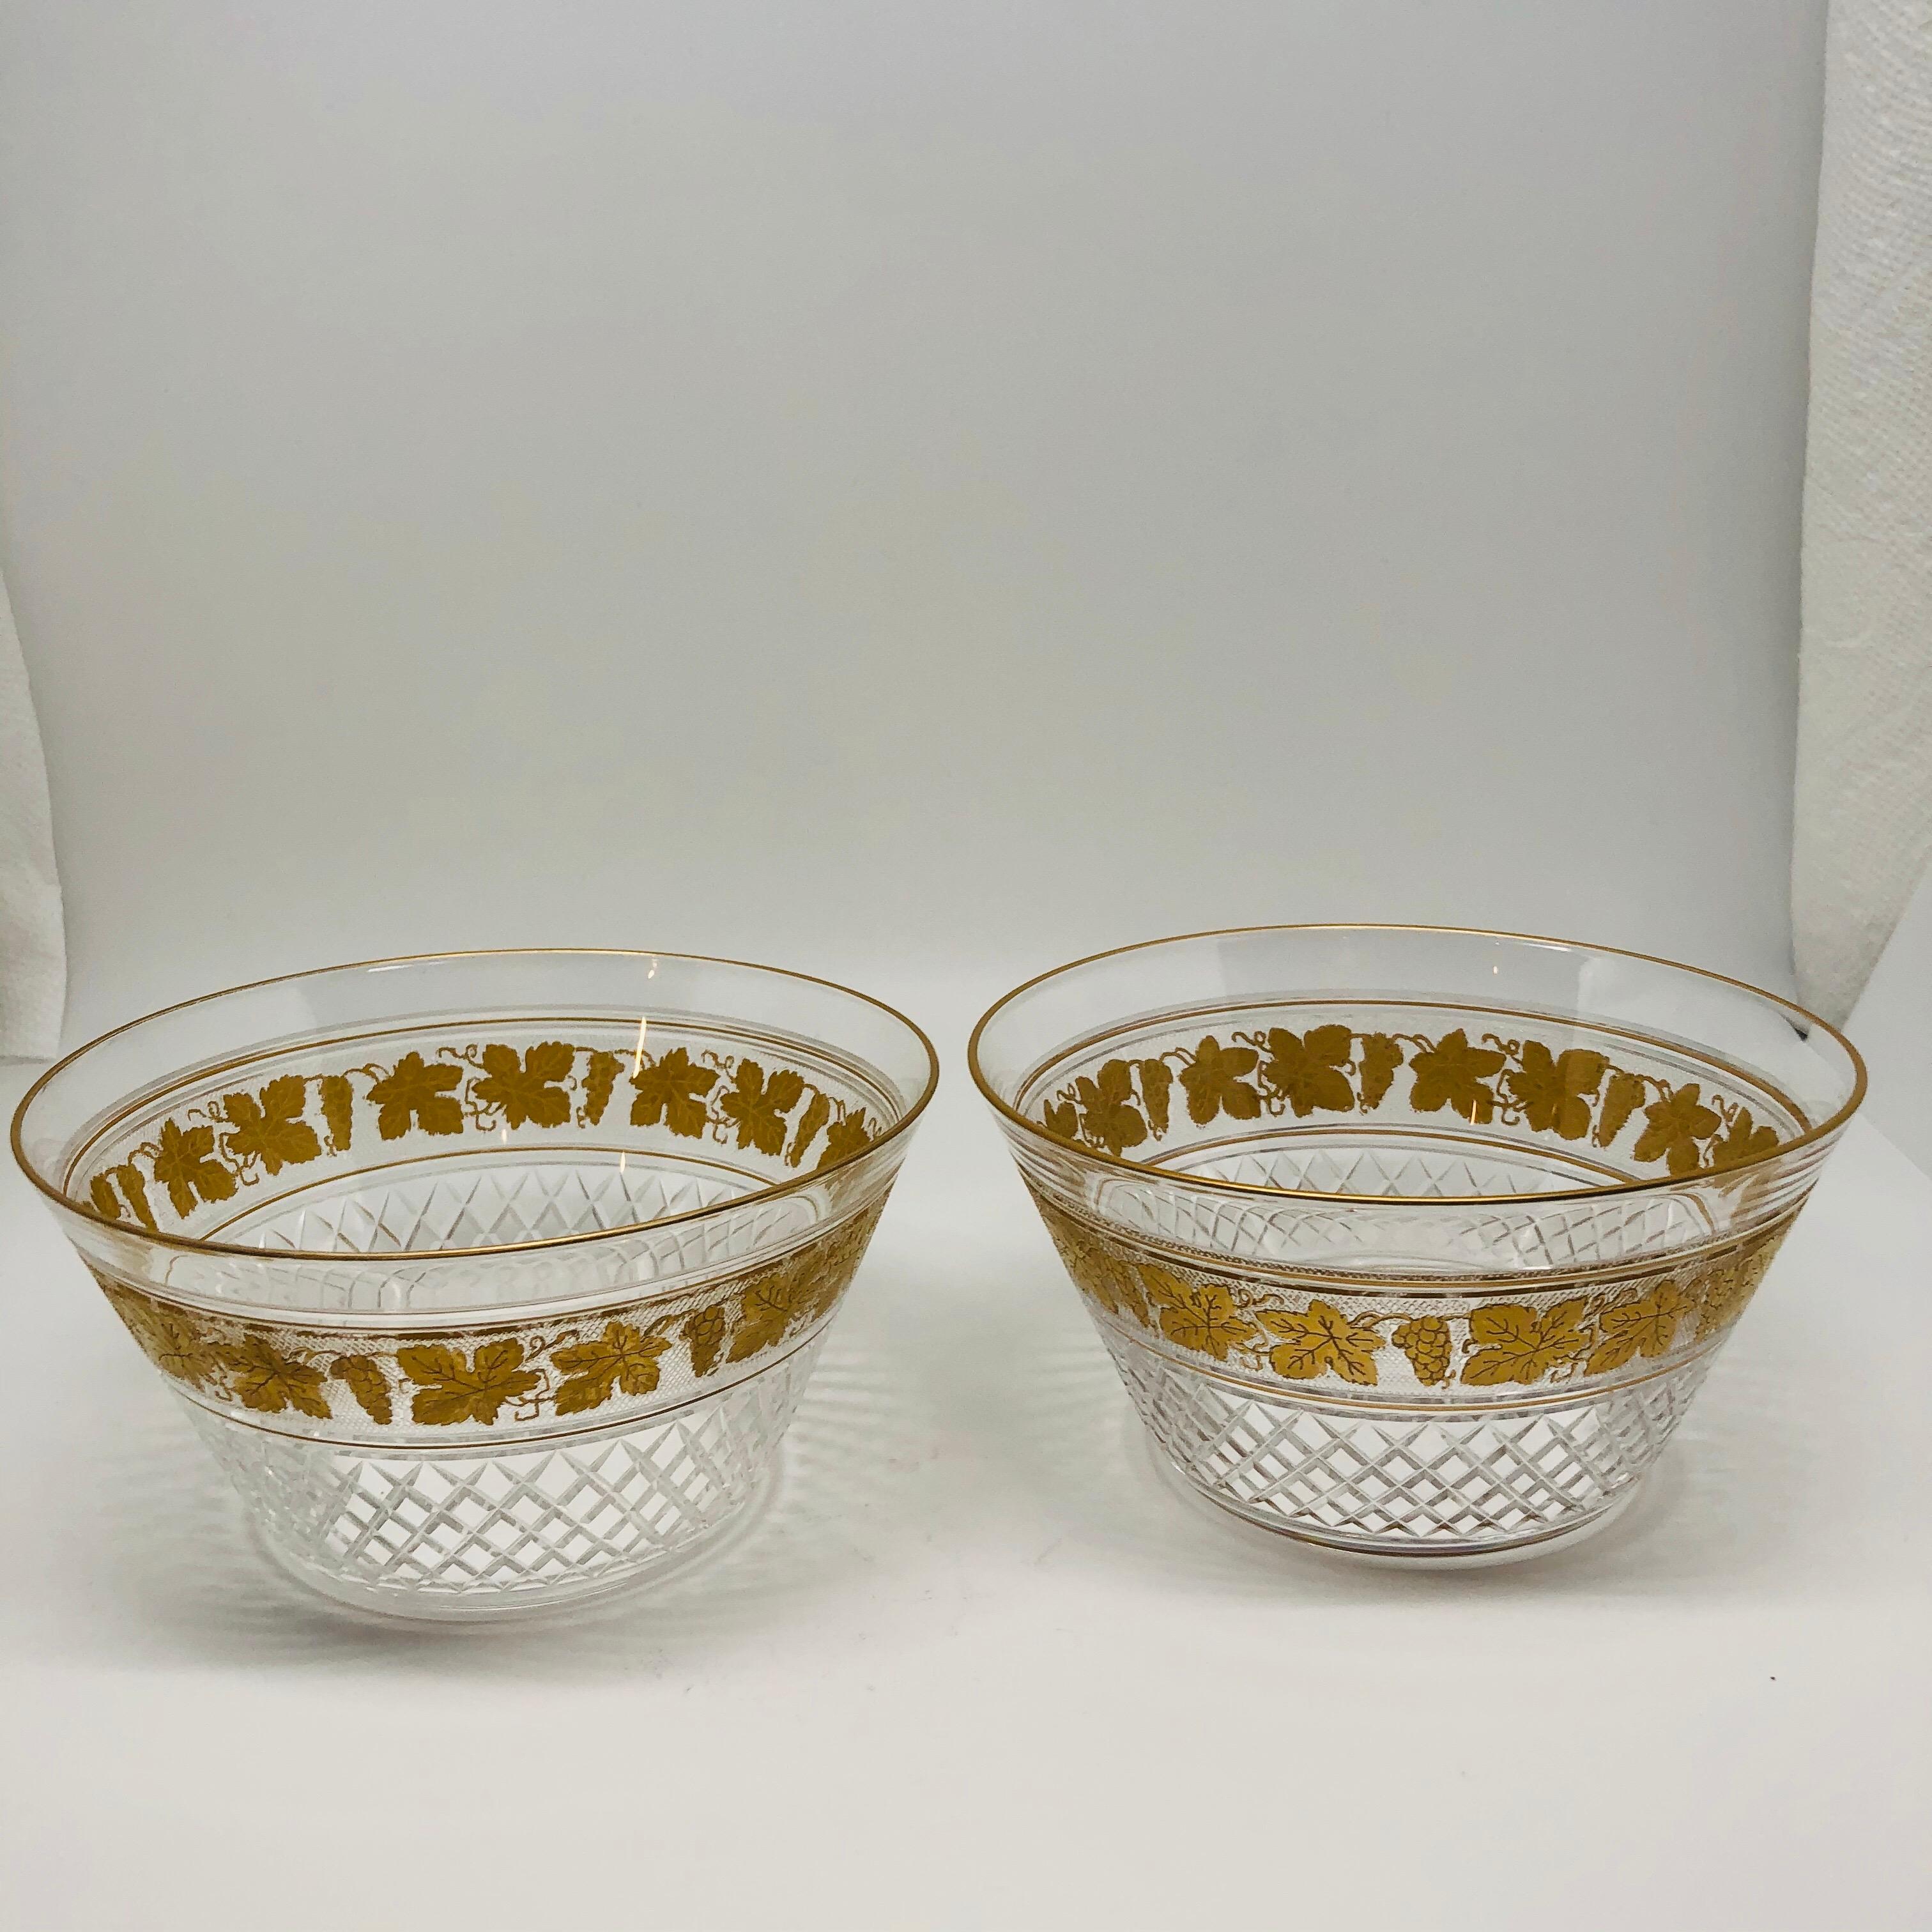 Belgian Set of 11 Val Saint Lambert Crystal Cut Glass Bowls with Gilded Leaf Decoration